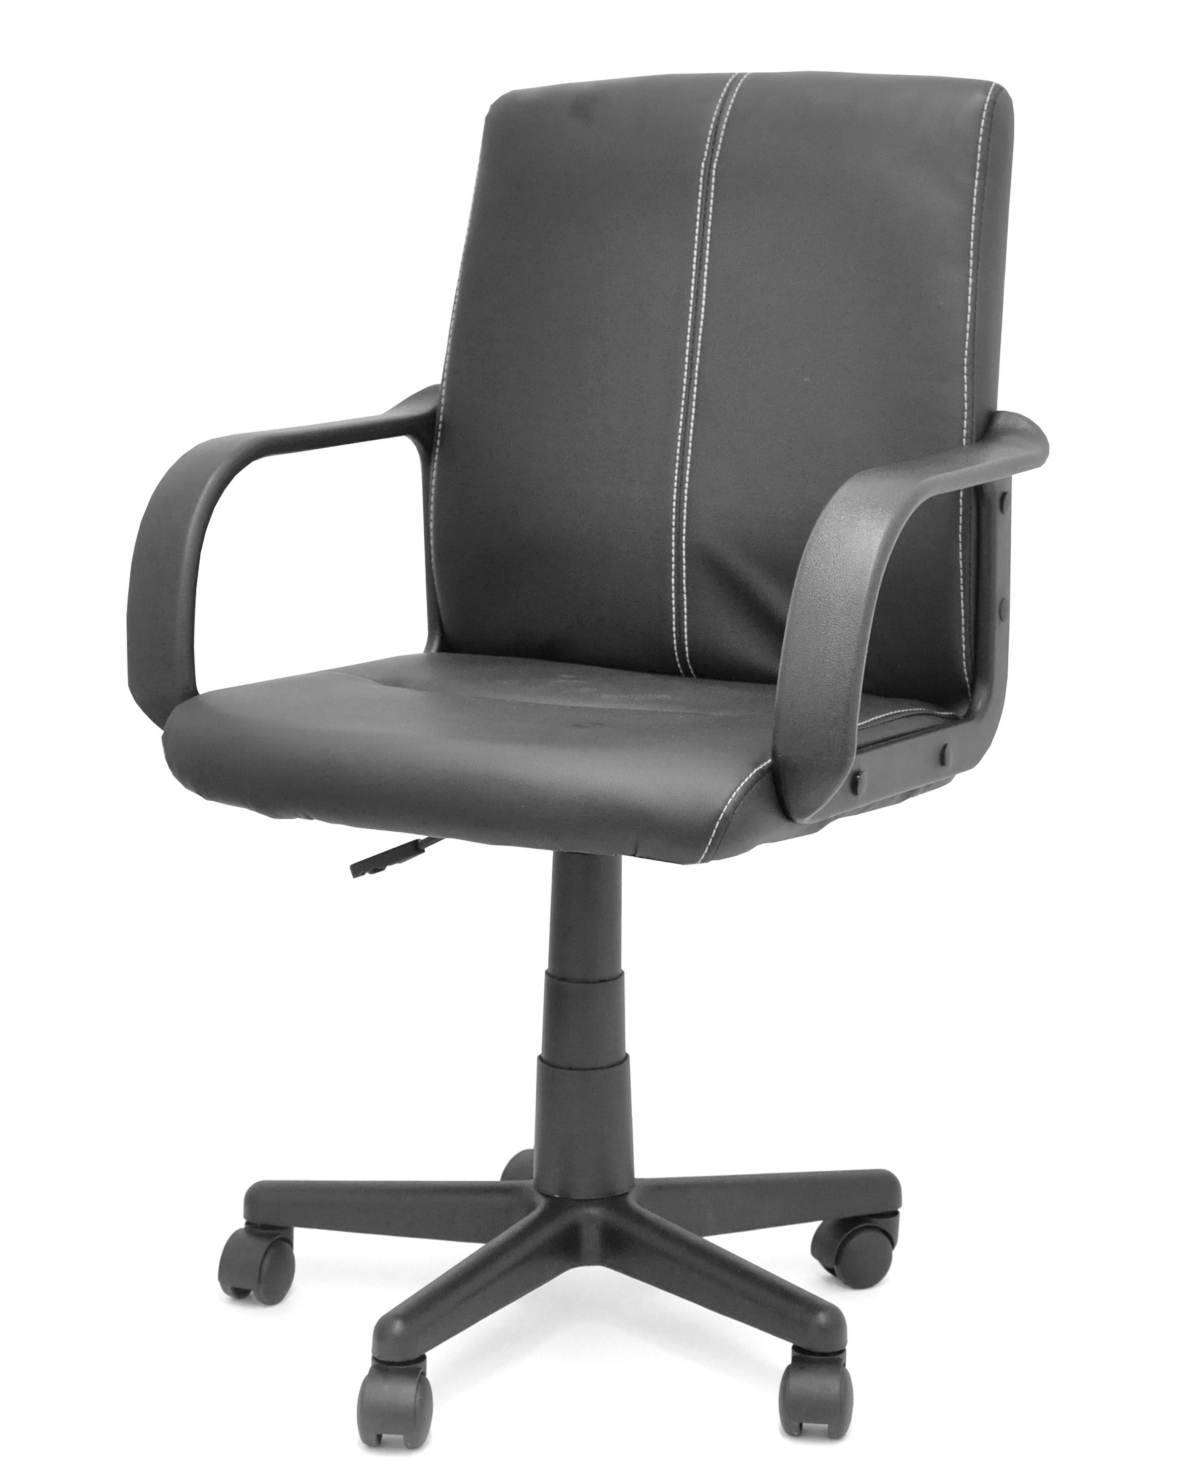 Idea Nuova Urban Living Tufted Leather Mid Back Rolling Office Chair